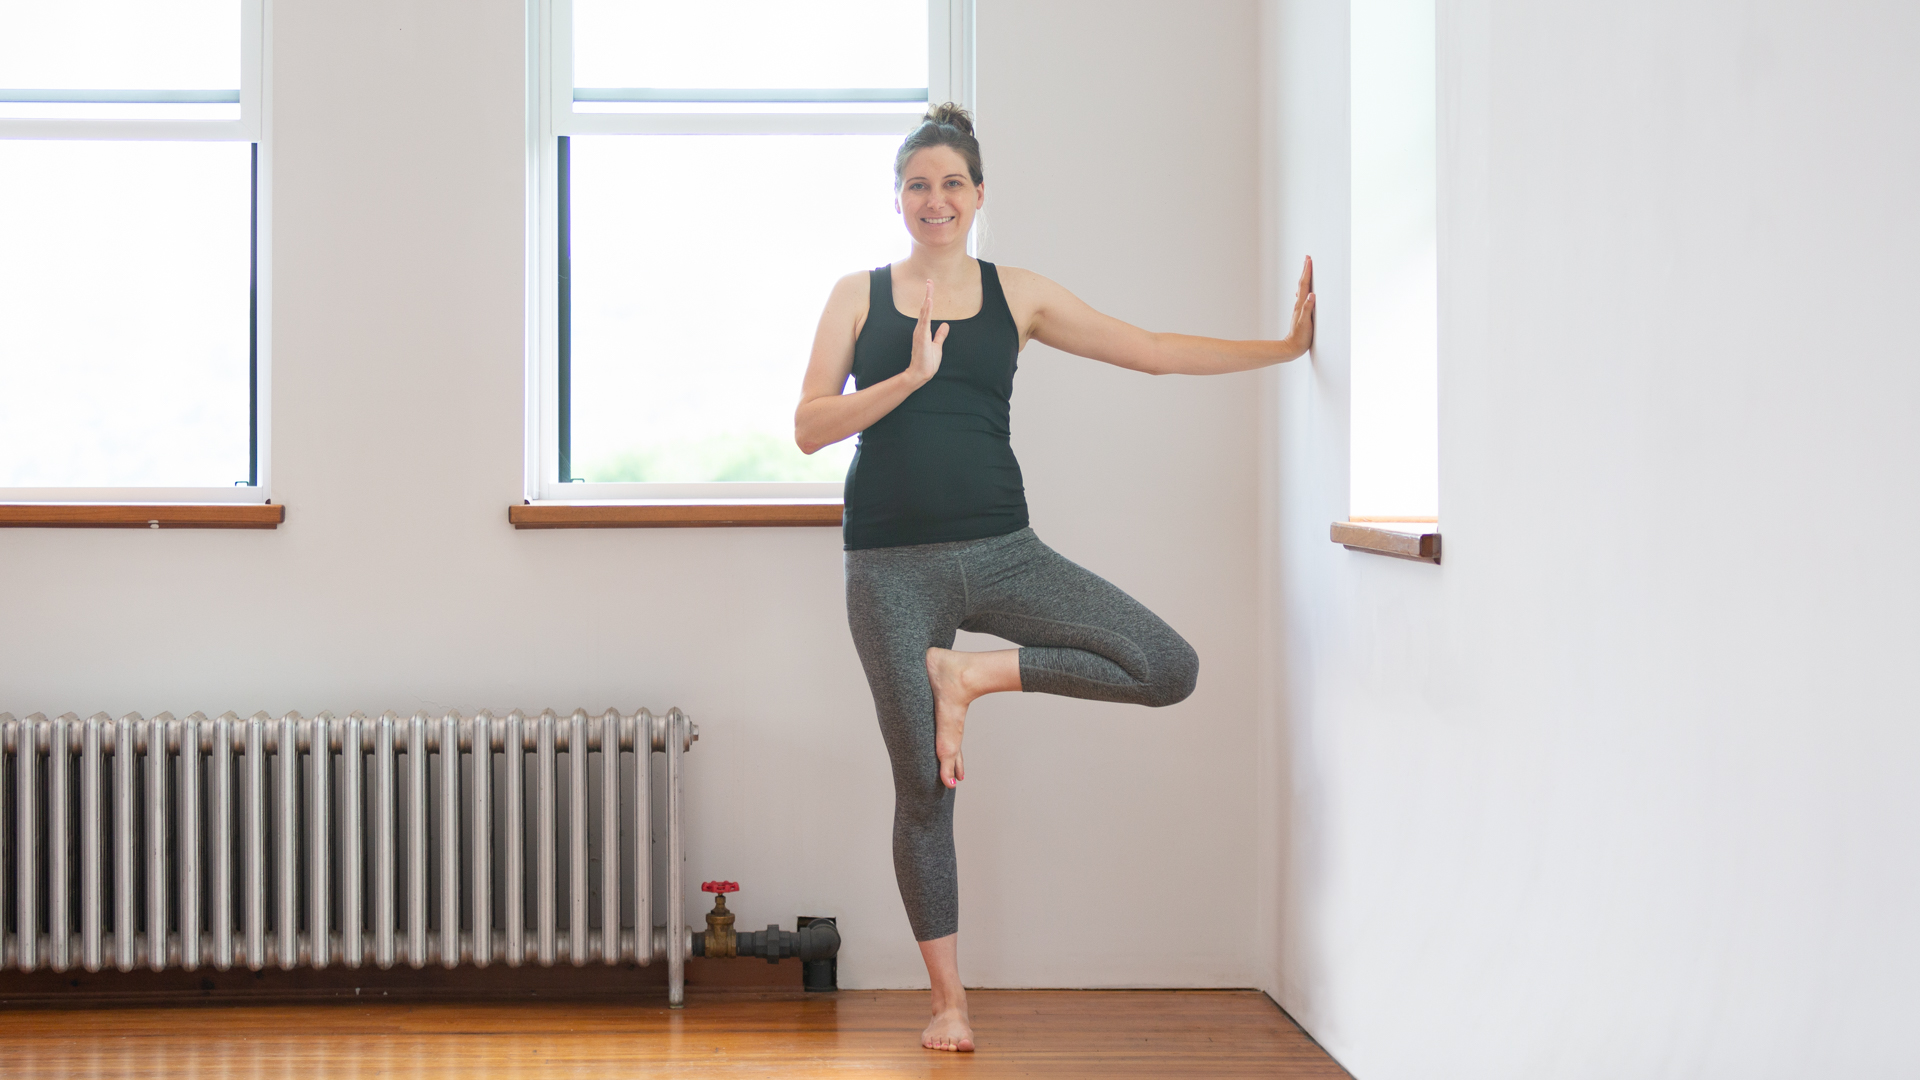 Pregnancy Yoga: Poses for the First Trimester - The Art of Living